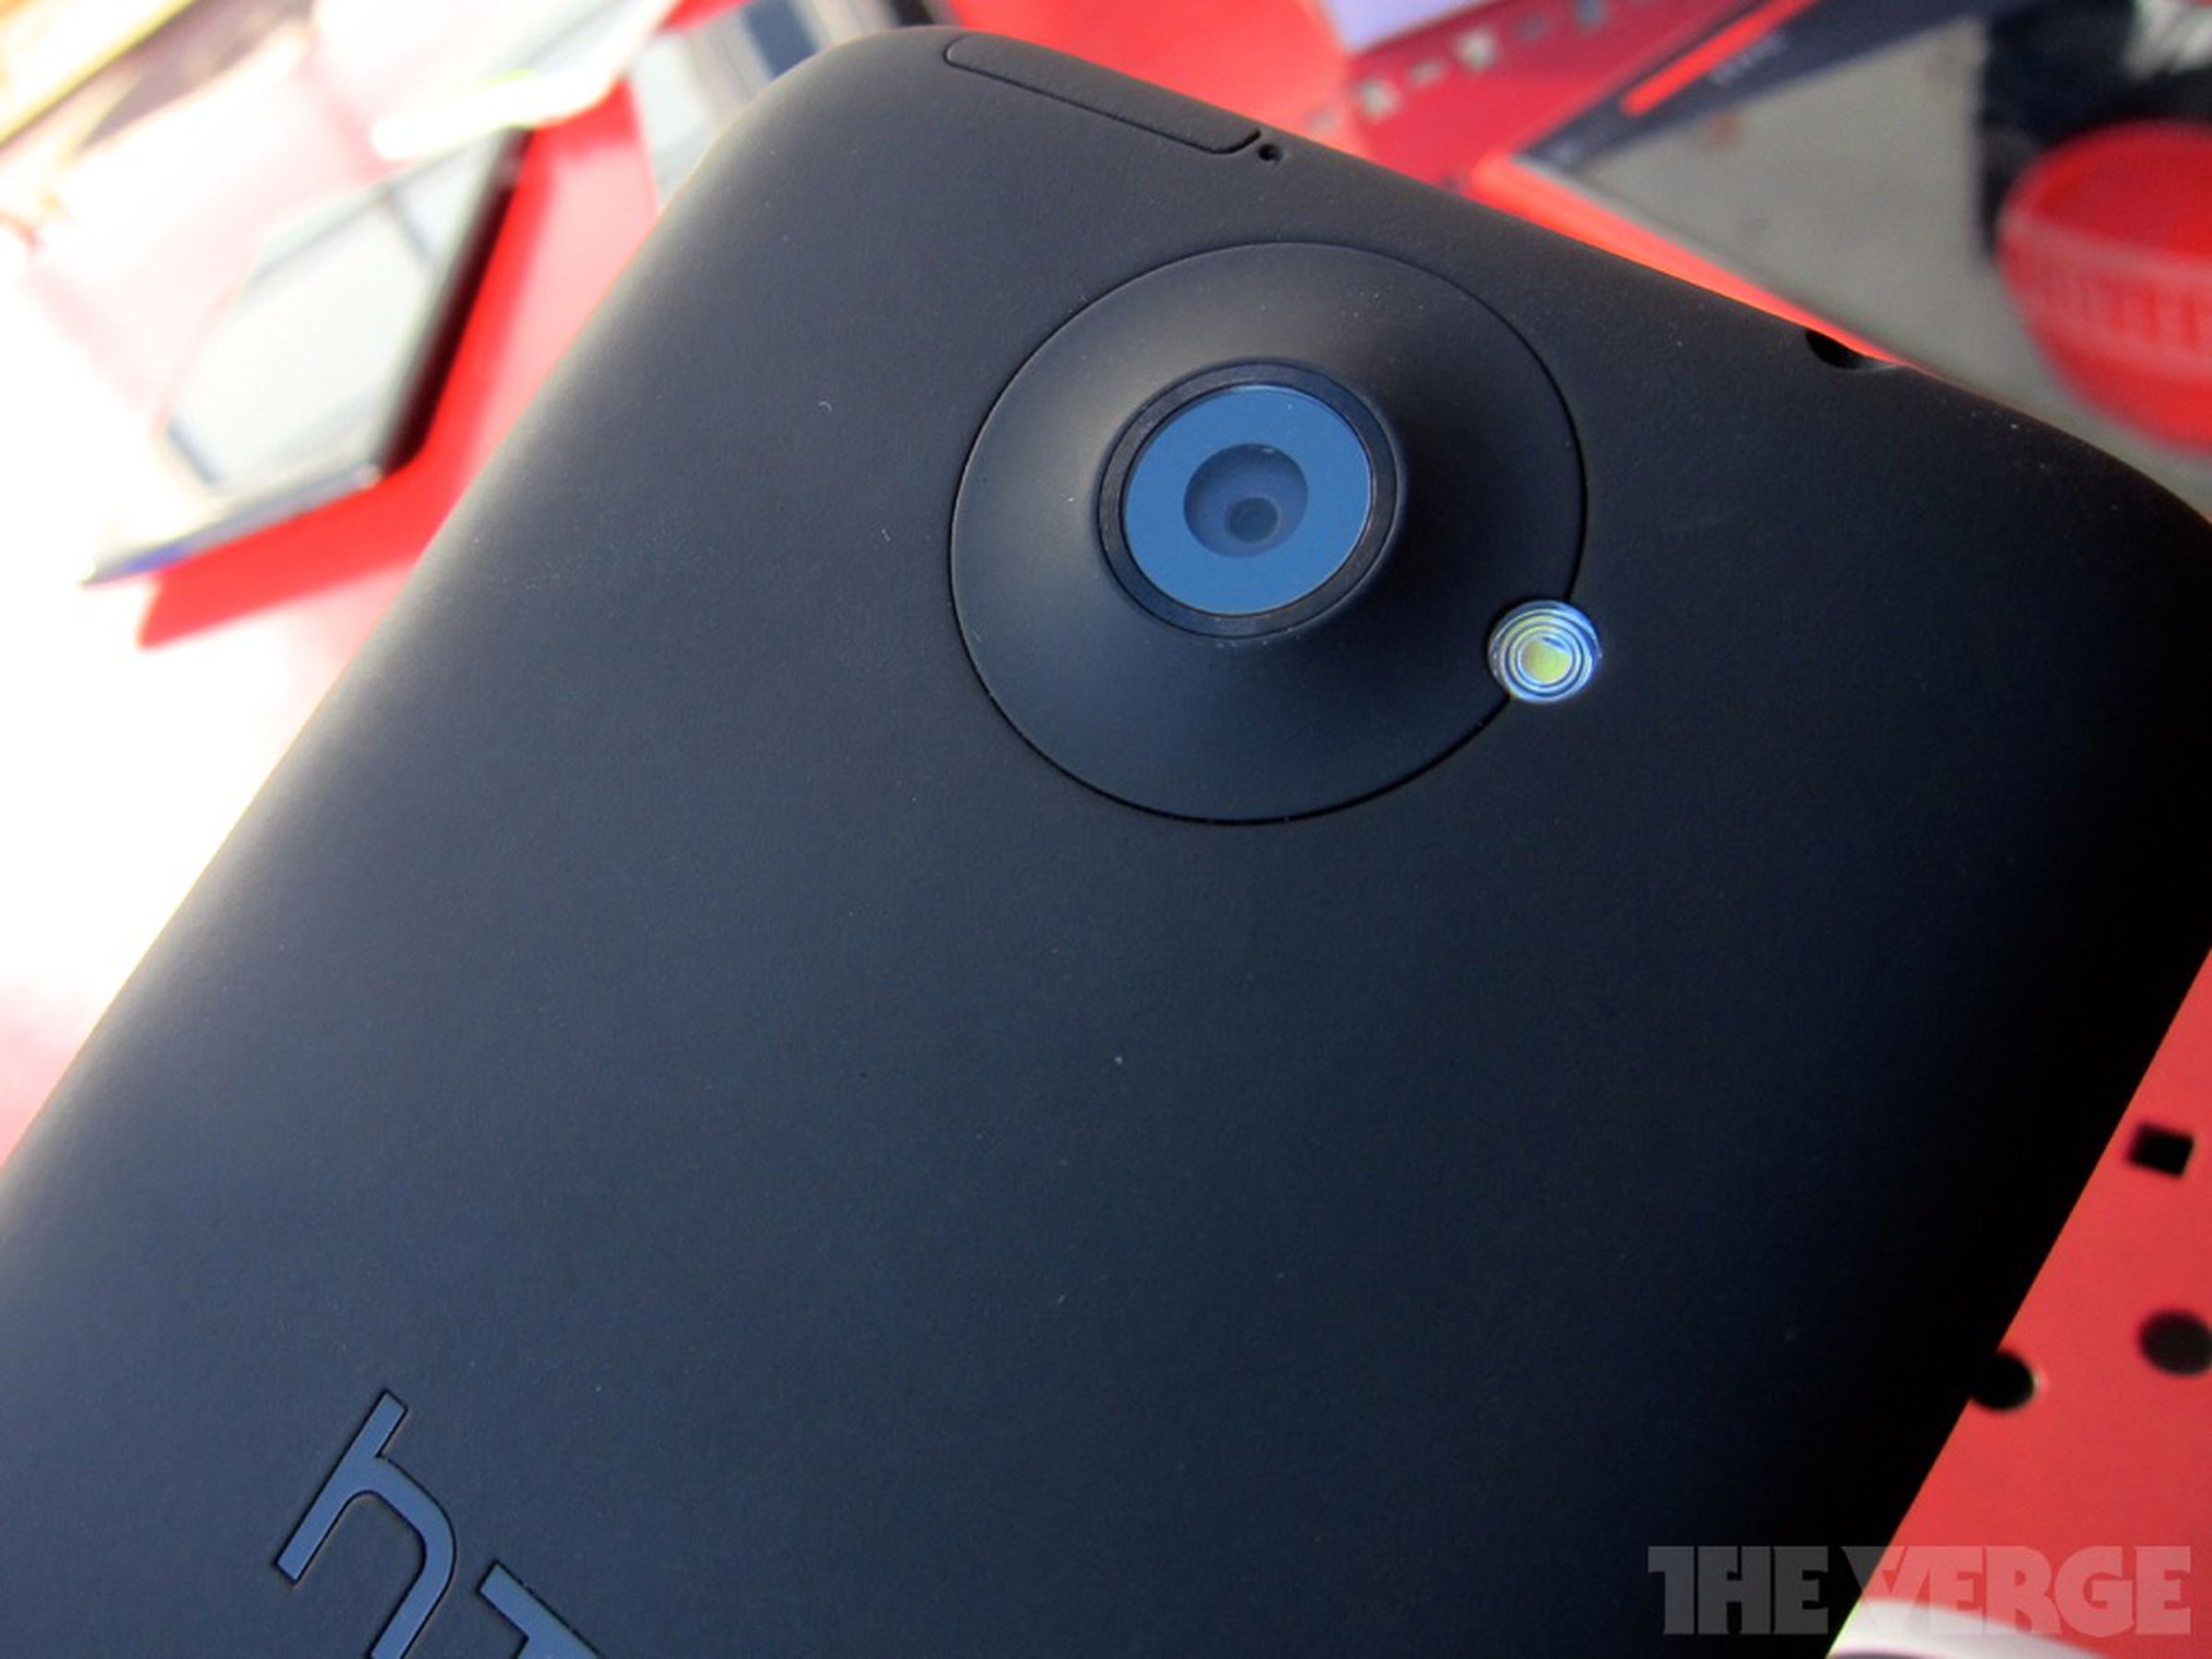 HTC One VX and One X+ AT&T hands-on pictures